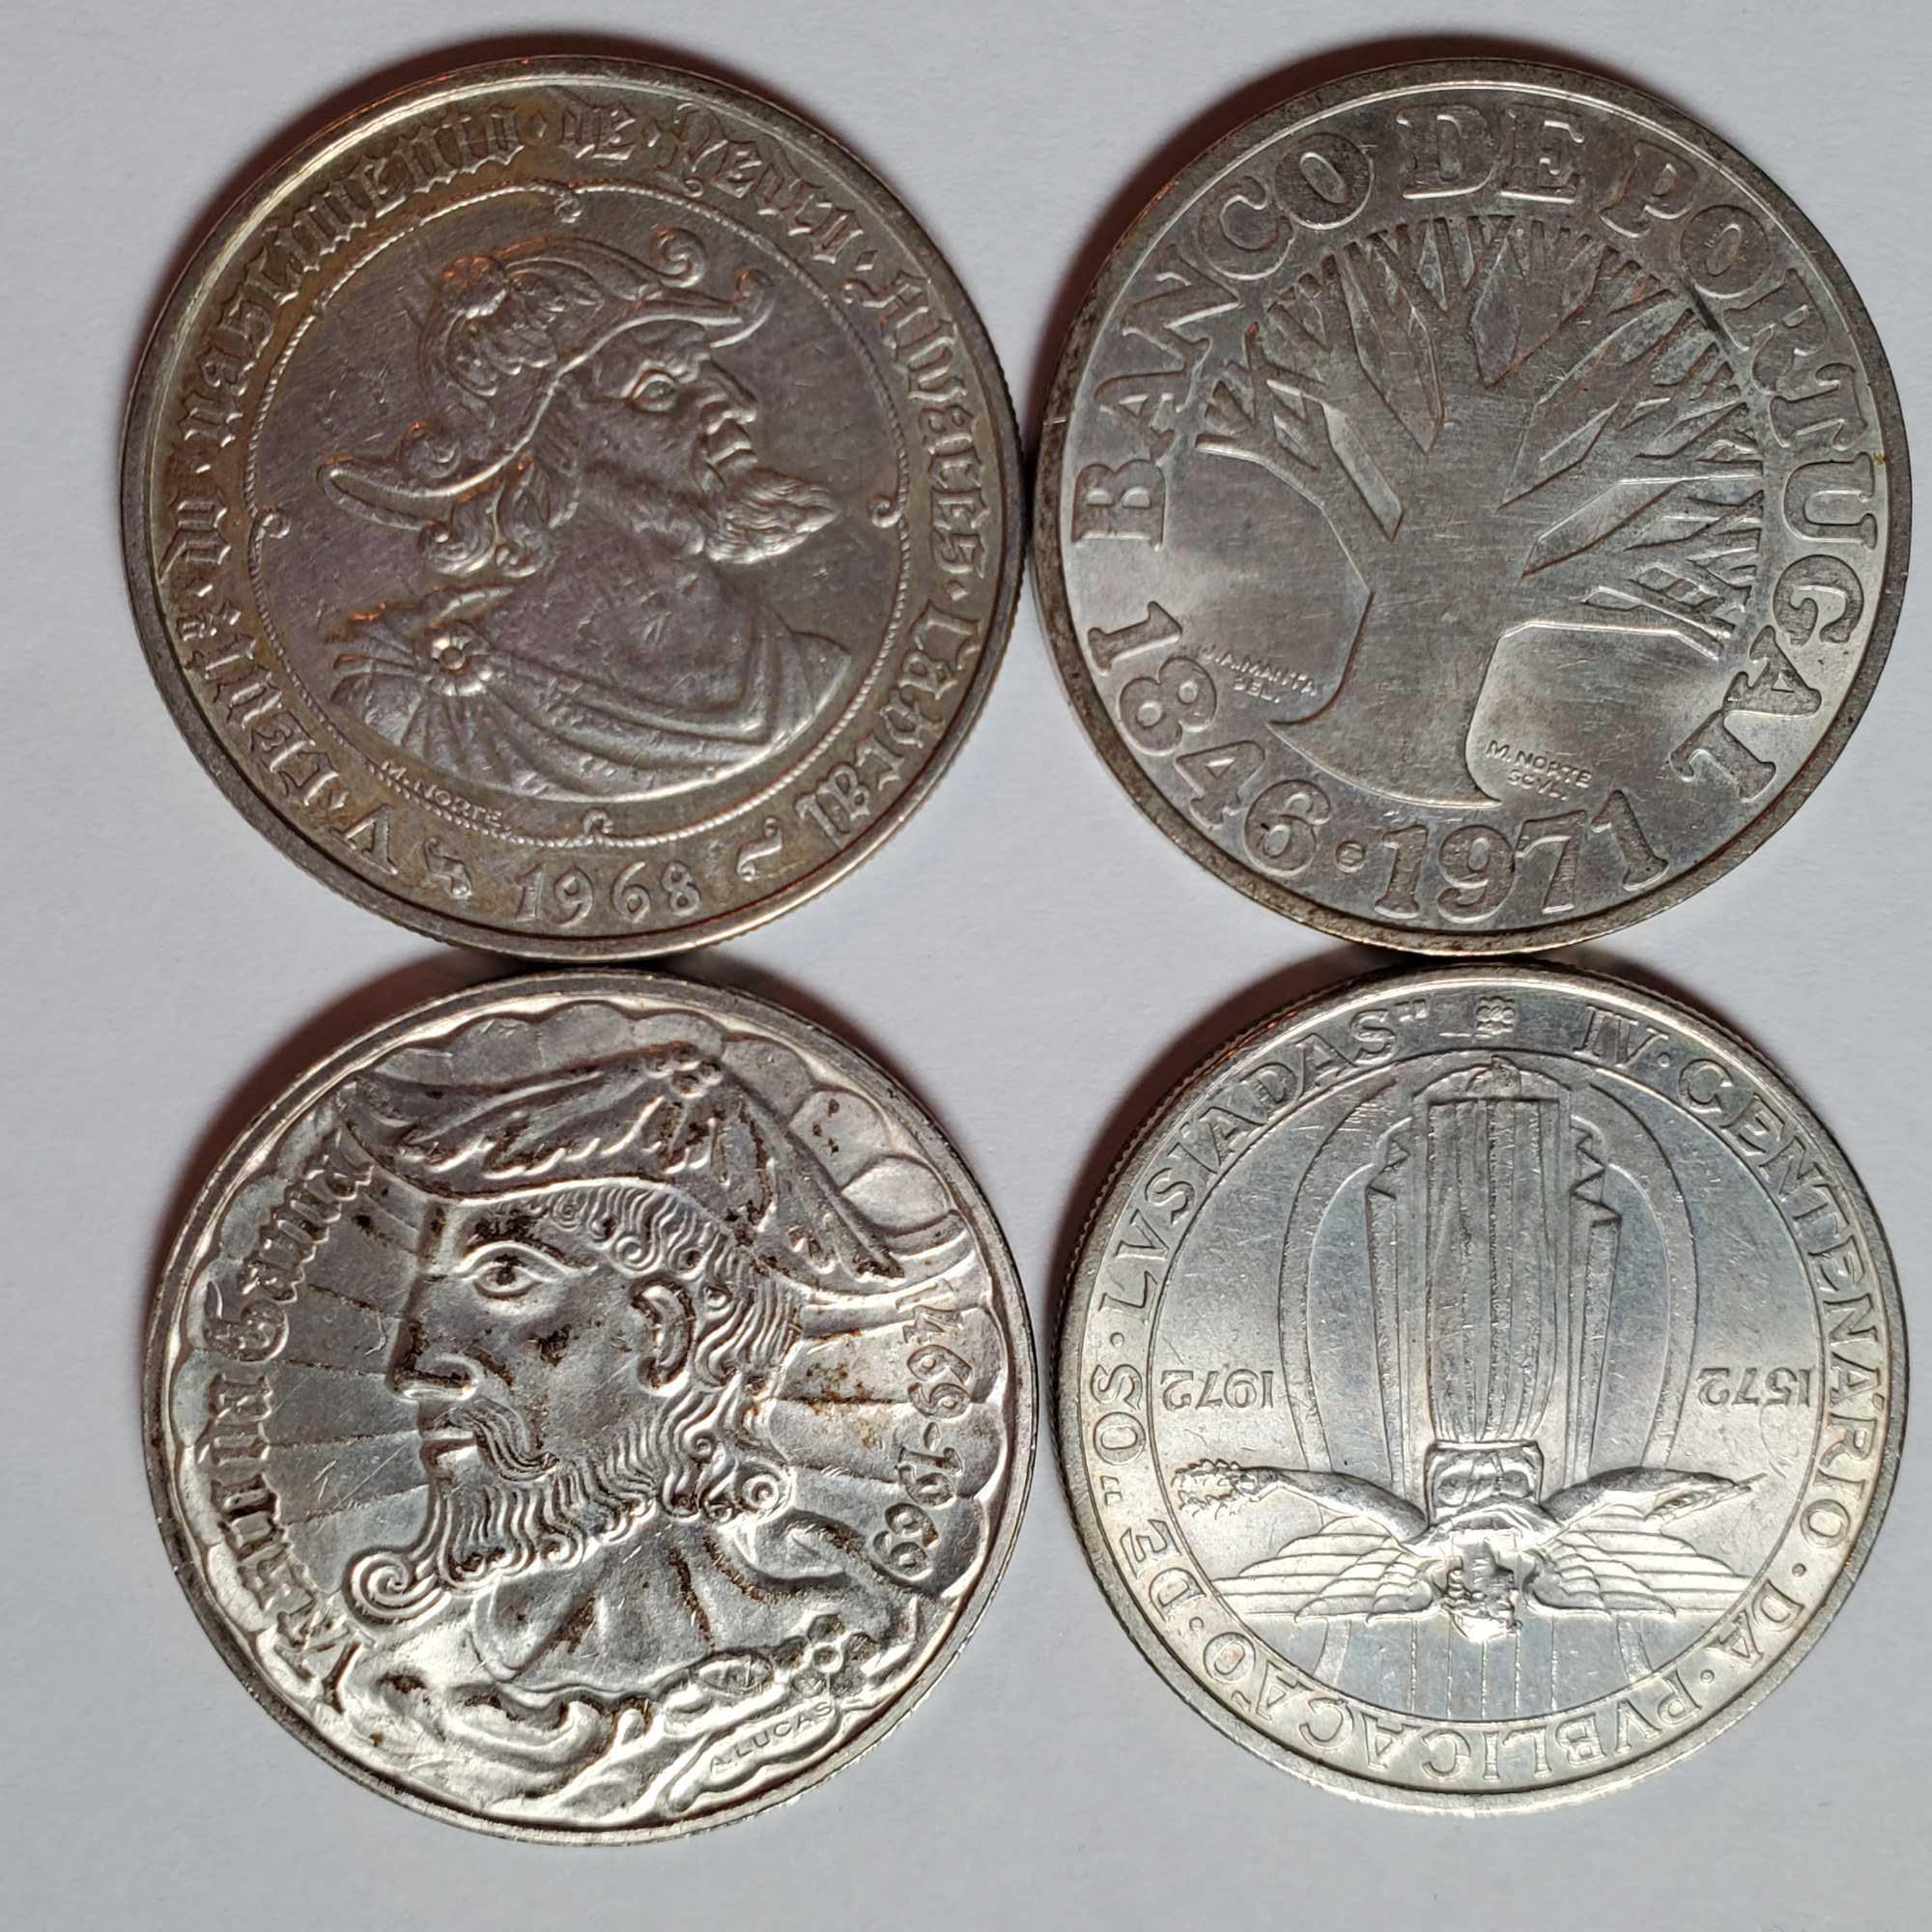 5 Portugal and 3 Italy Commemorative Silver Coins